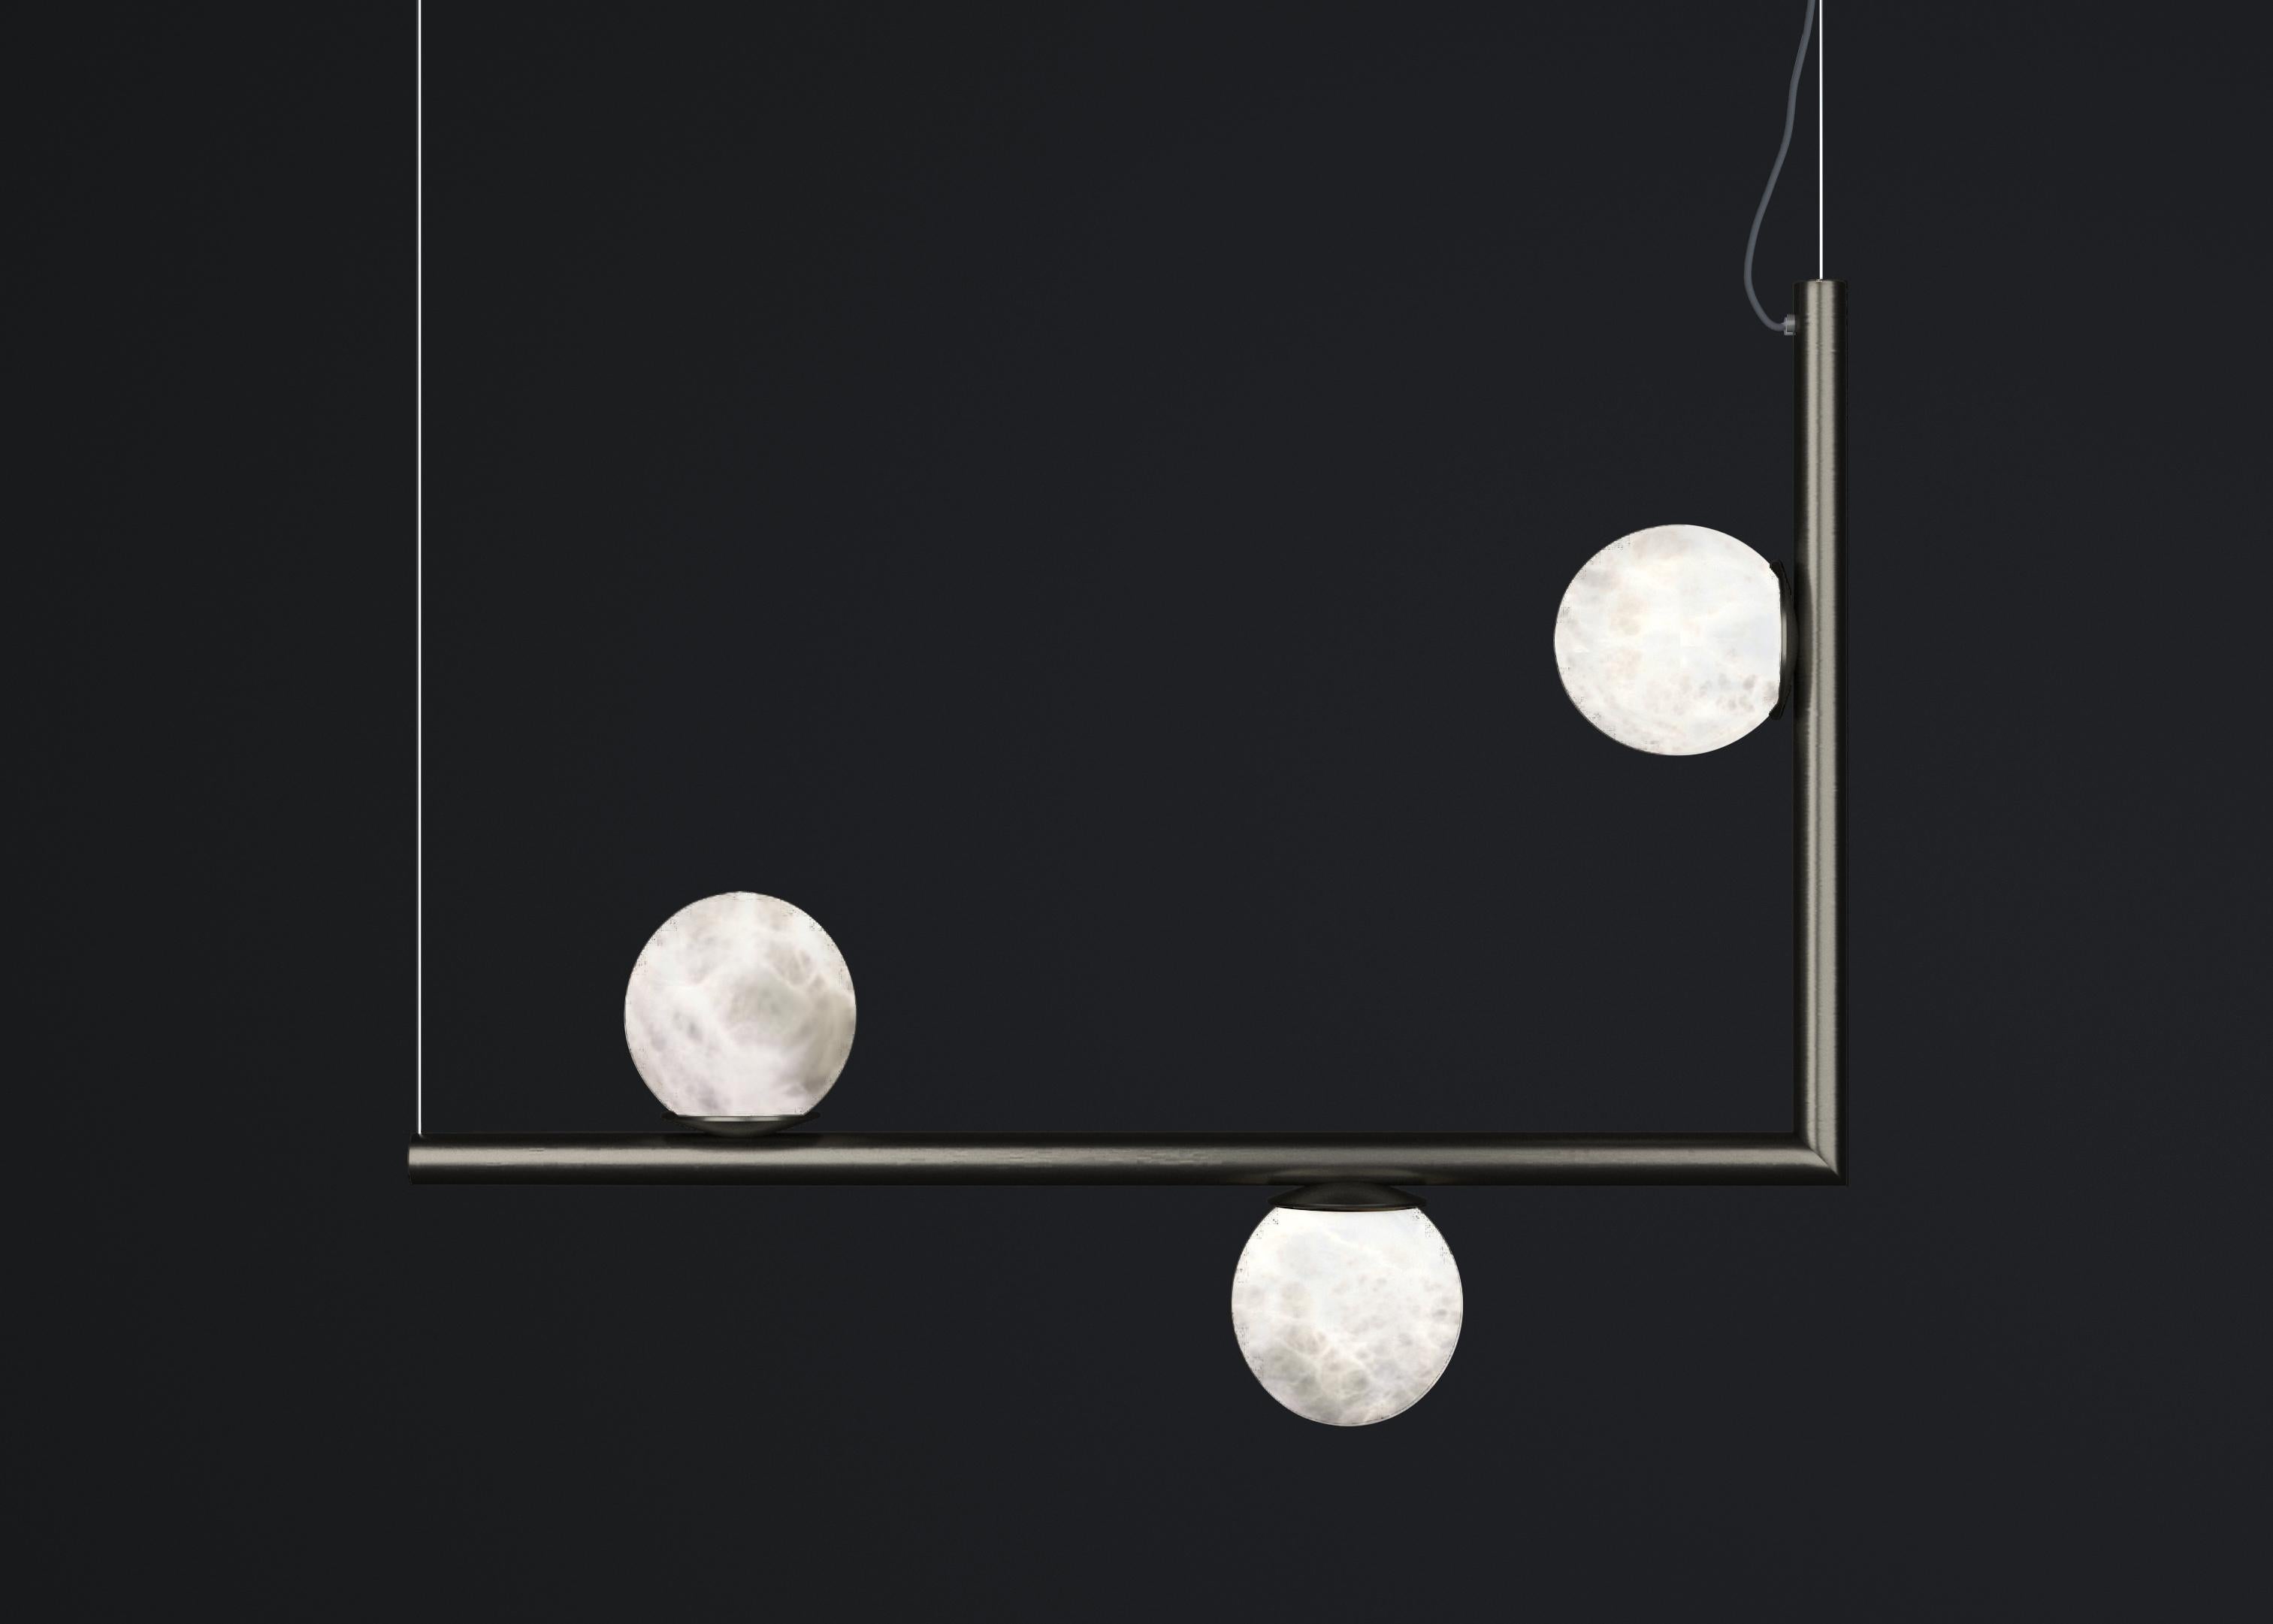 Ofione 1 Brushed Black Metal Pendant Lamp by Alabastro Italiano
Dimensions: D 15 x W 85 x H 64 cm.
Materials: White alabaster and metal.

Available in different finishes: Shiny Silver, Bronze, Brushed Brass, Ruggine of Florence, Brushed Burnished,